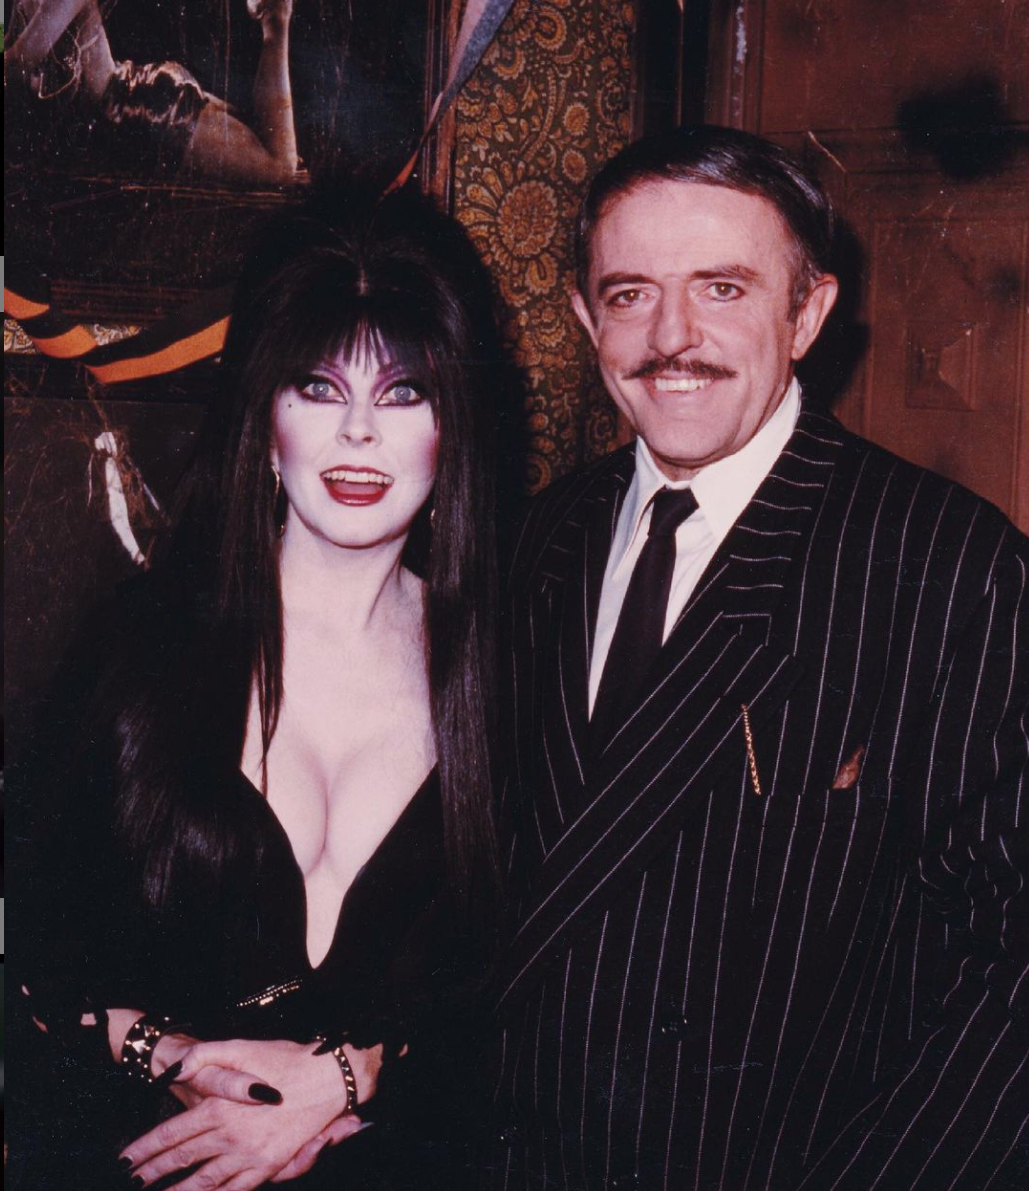 Elvira posing for a photo with Gomez Addams both in their costumes smiling.